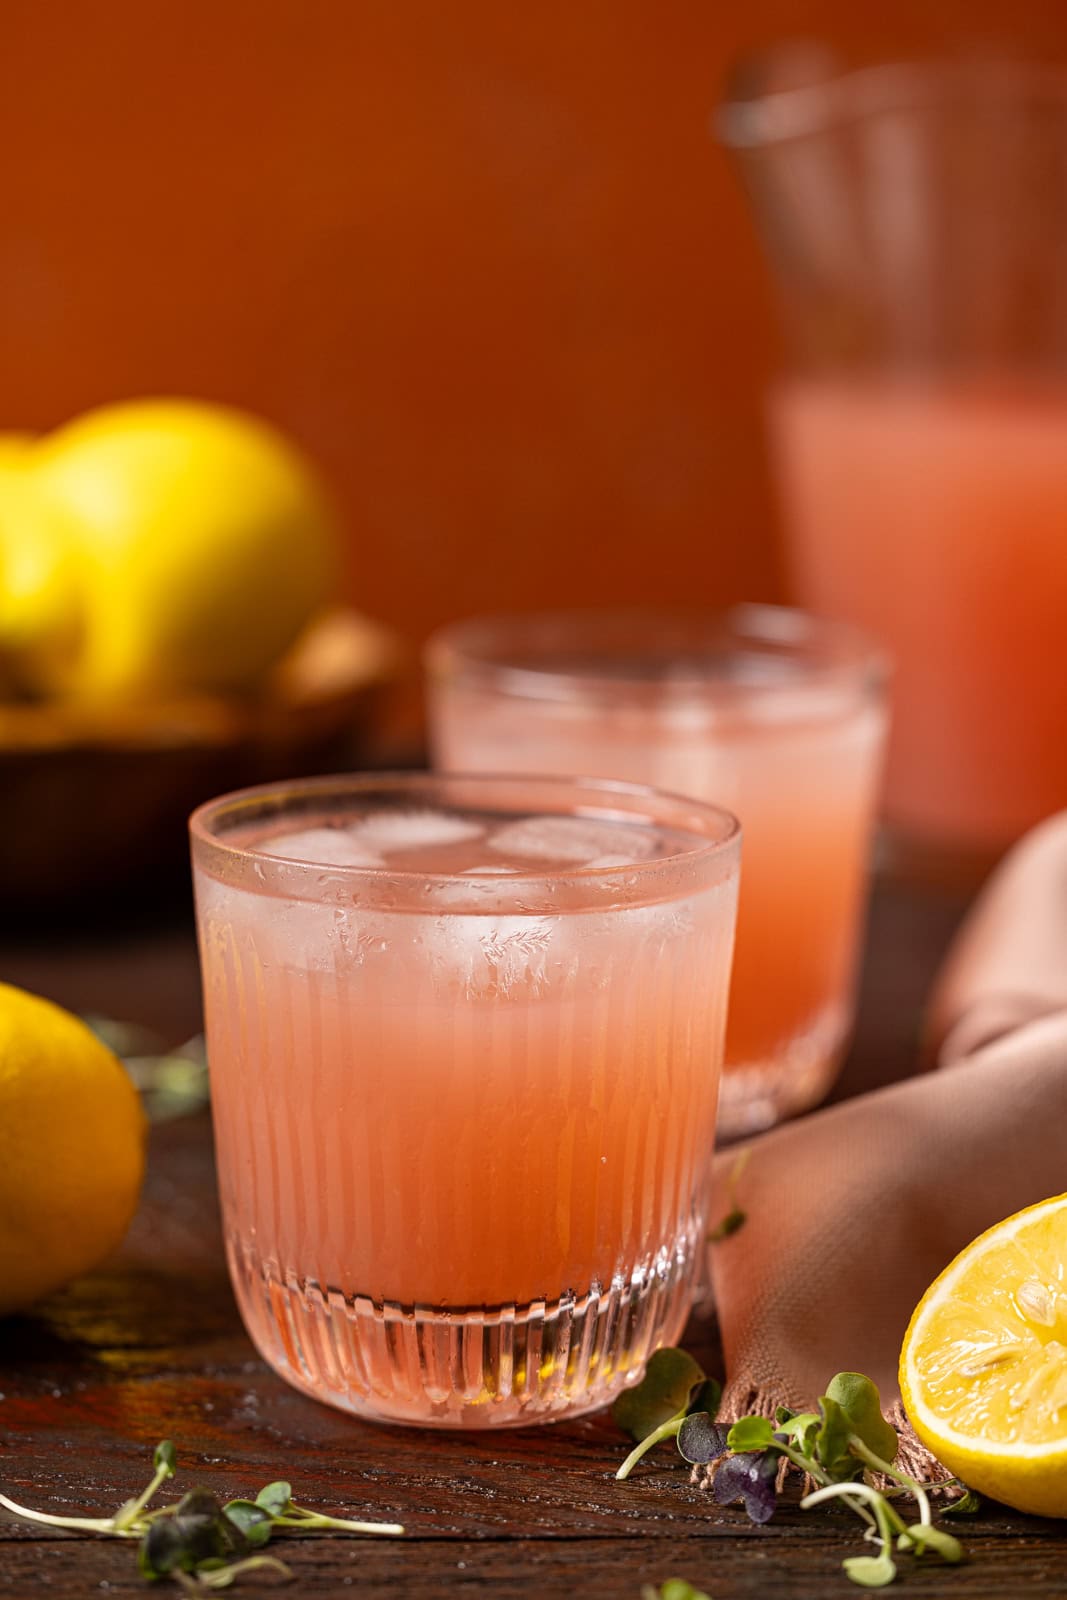 Glass of pink lemonade with a pitcher and lemons.